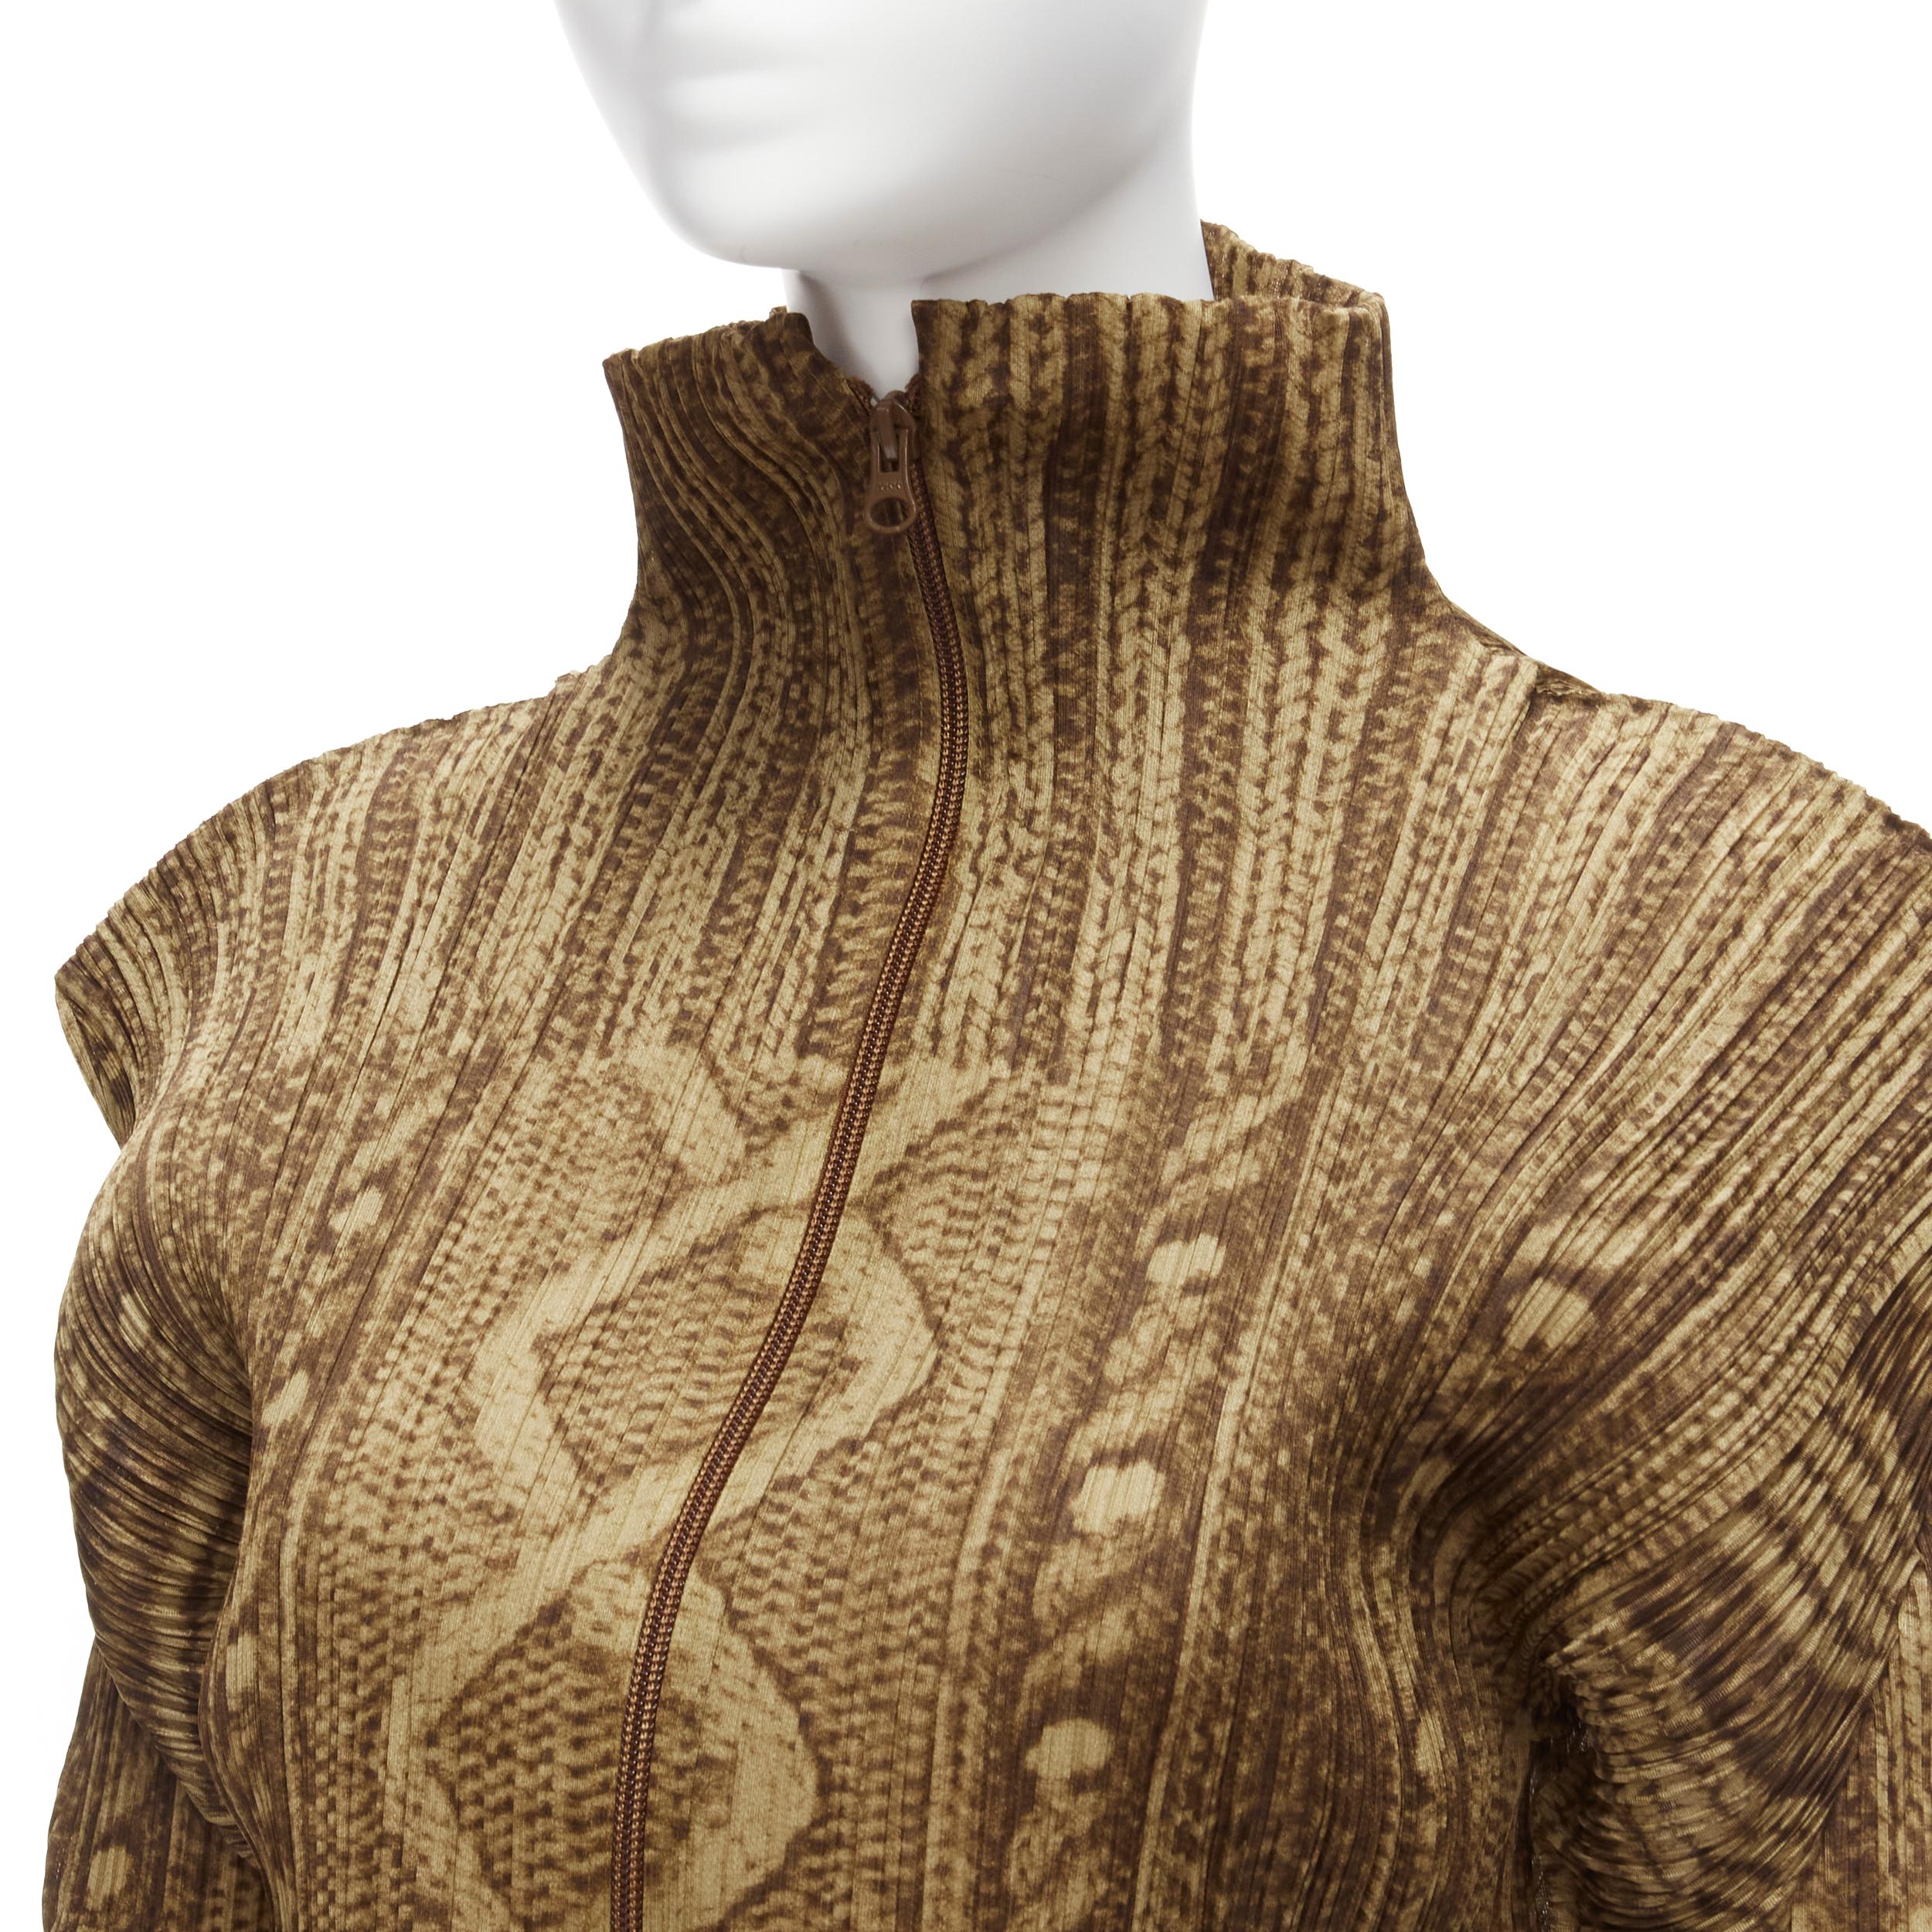 ISSEY MIYAKE PLEATS PLEASE brown tromp loeil cable knit zip up jacket JP4 XL
Reference: TGAS/D00216
Brand: Pleats Please
Material: Polyester
Color: Brown
Pattern: Photographic Print
Closure: Zip
Made in: Japan

CONDITION:
Condition: Excellent, this